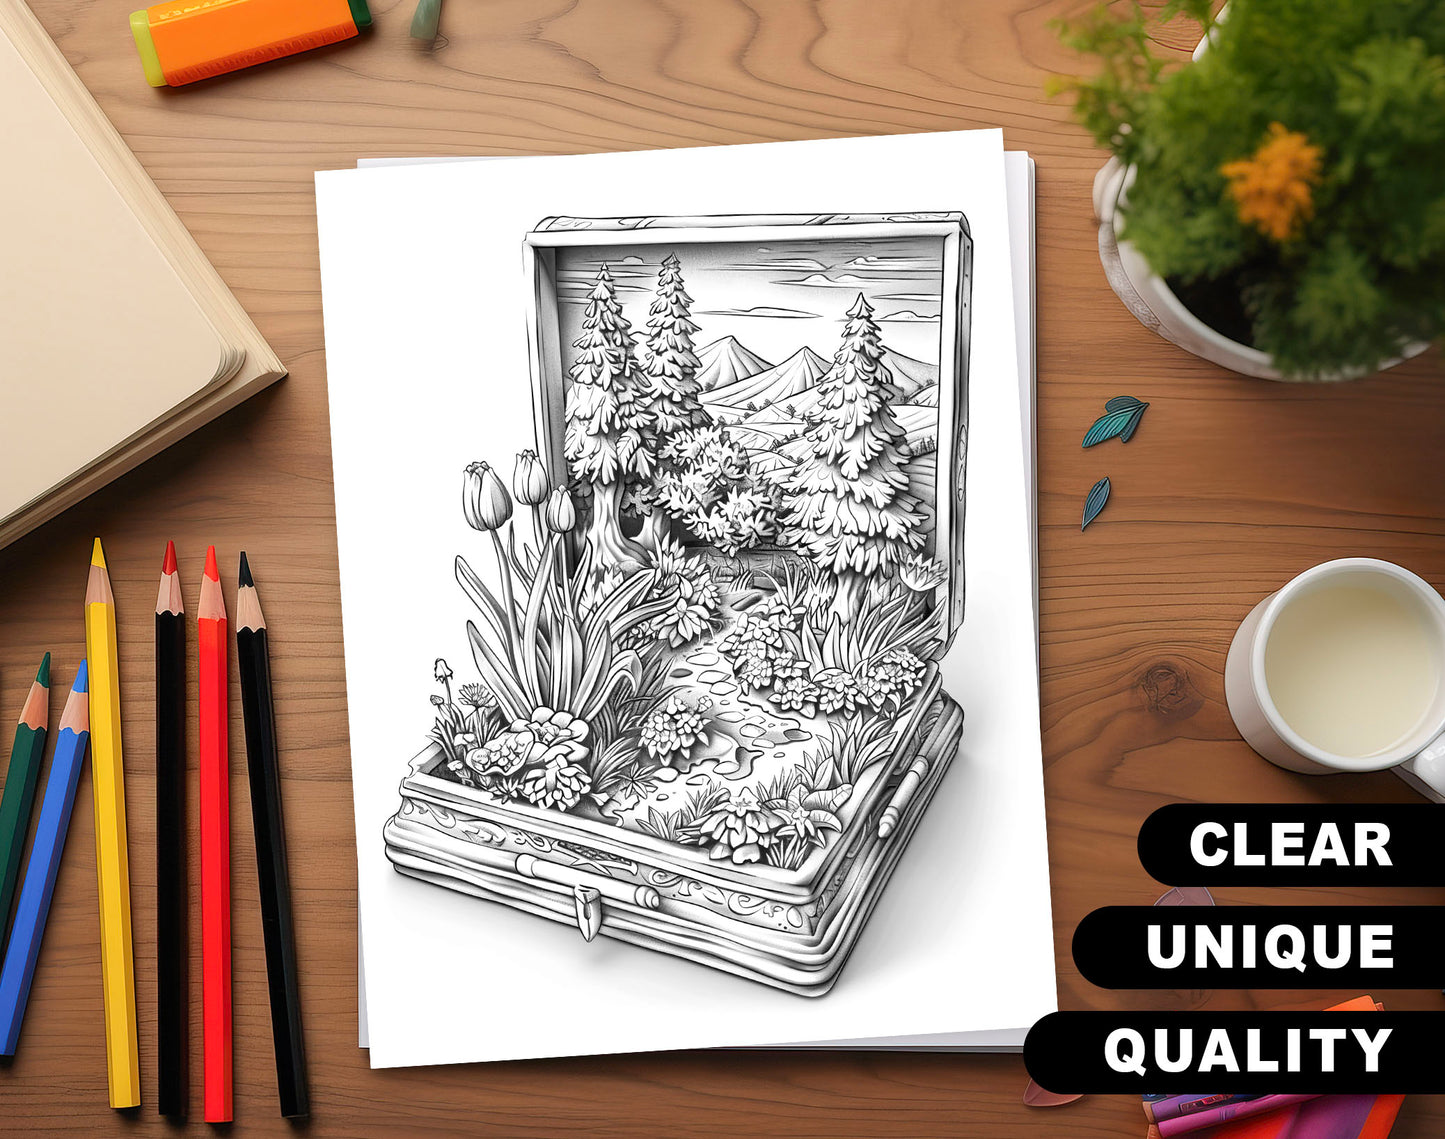 50 World In The Box Grayscale Coloring Pages - Instant Download - Printable PDF Dark/Light